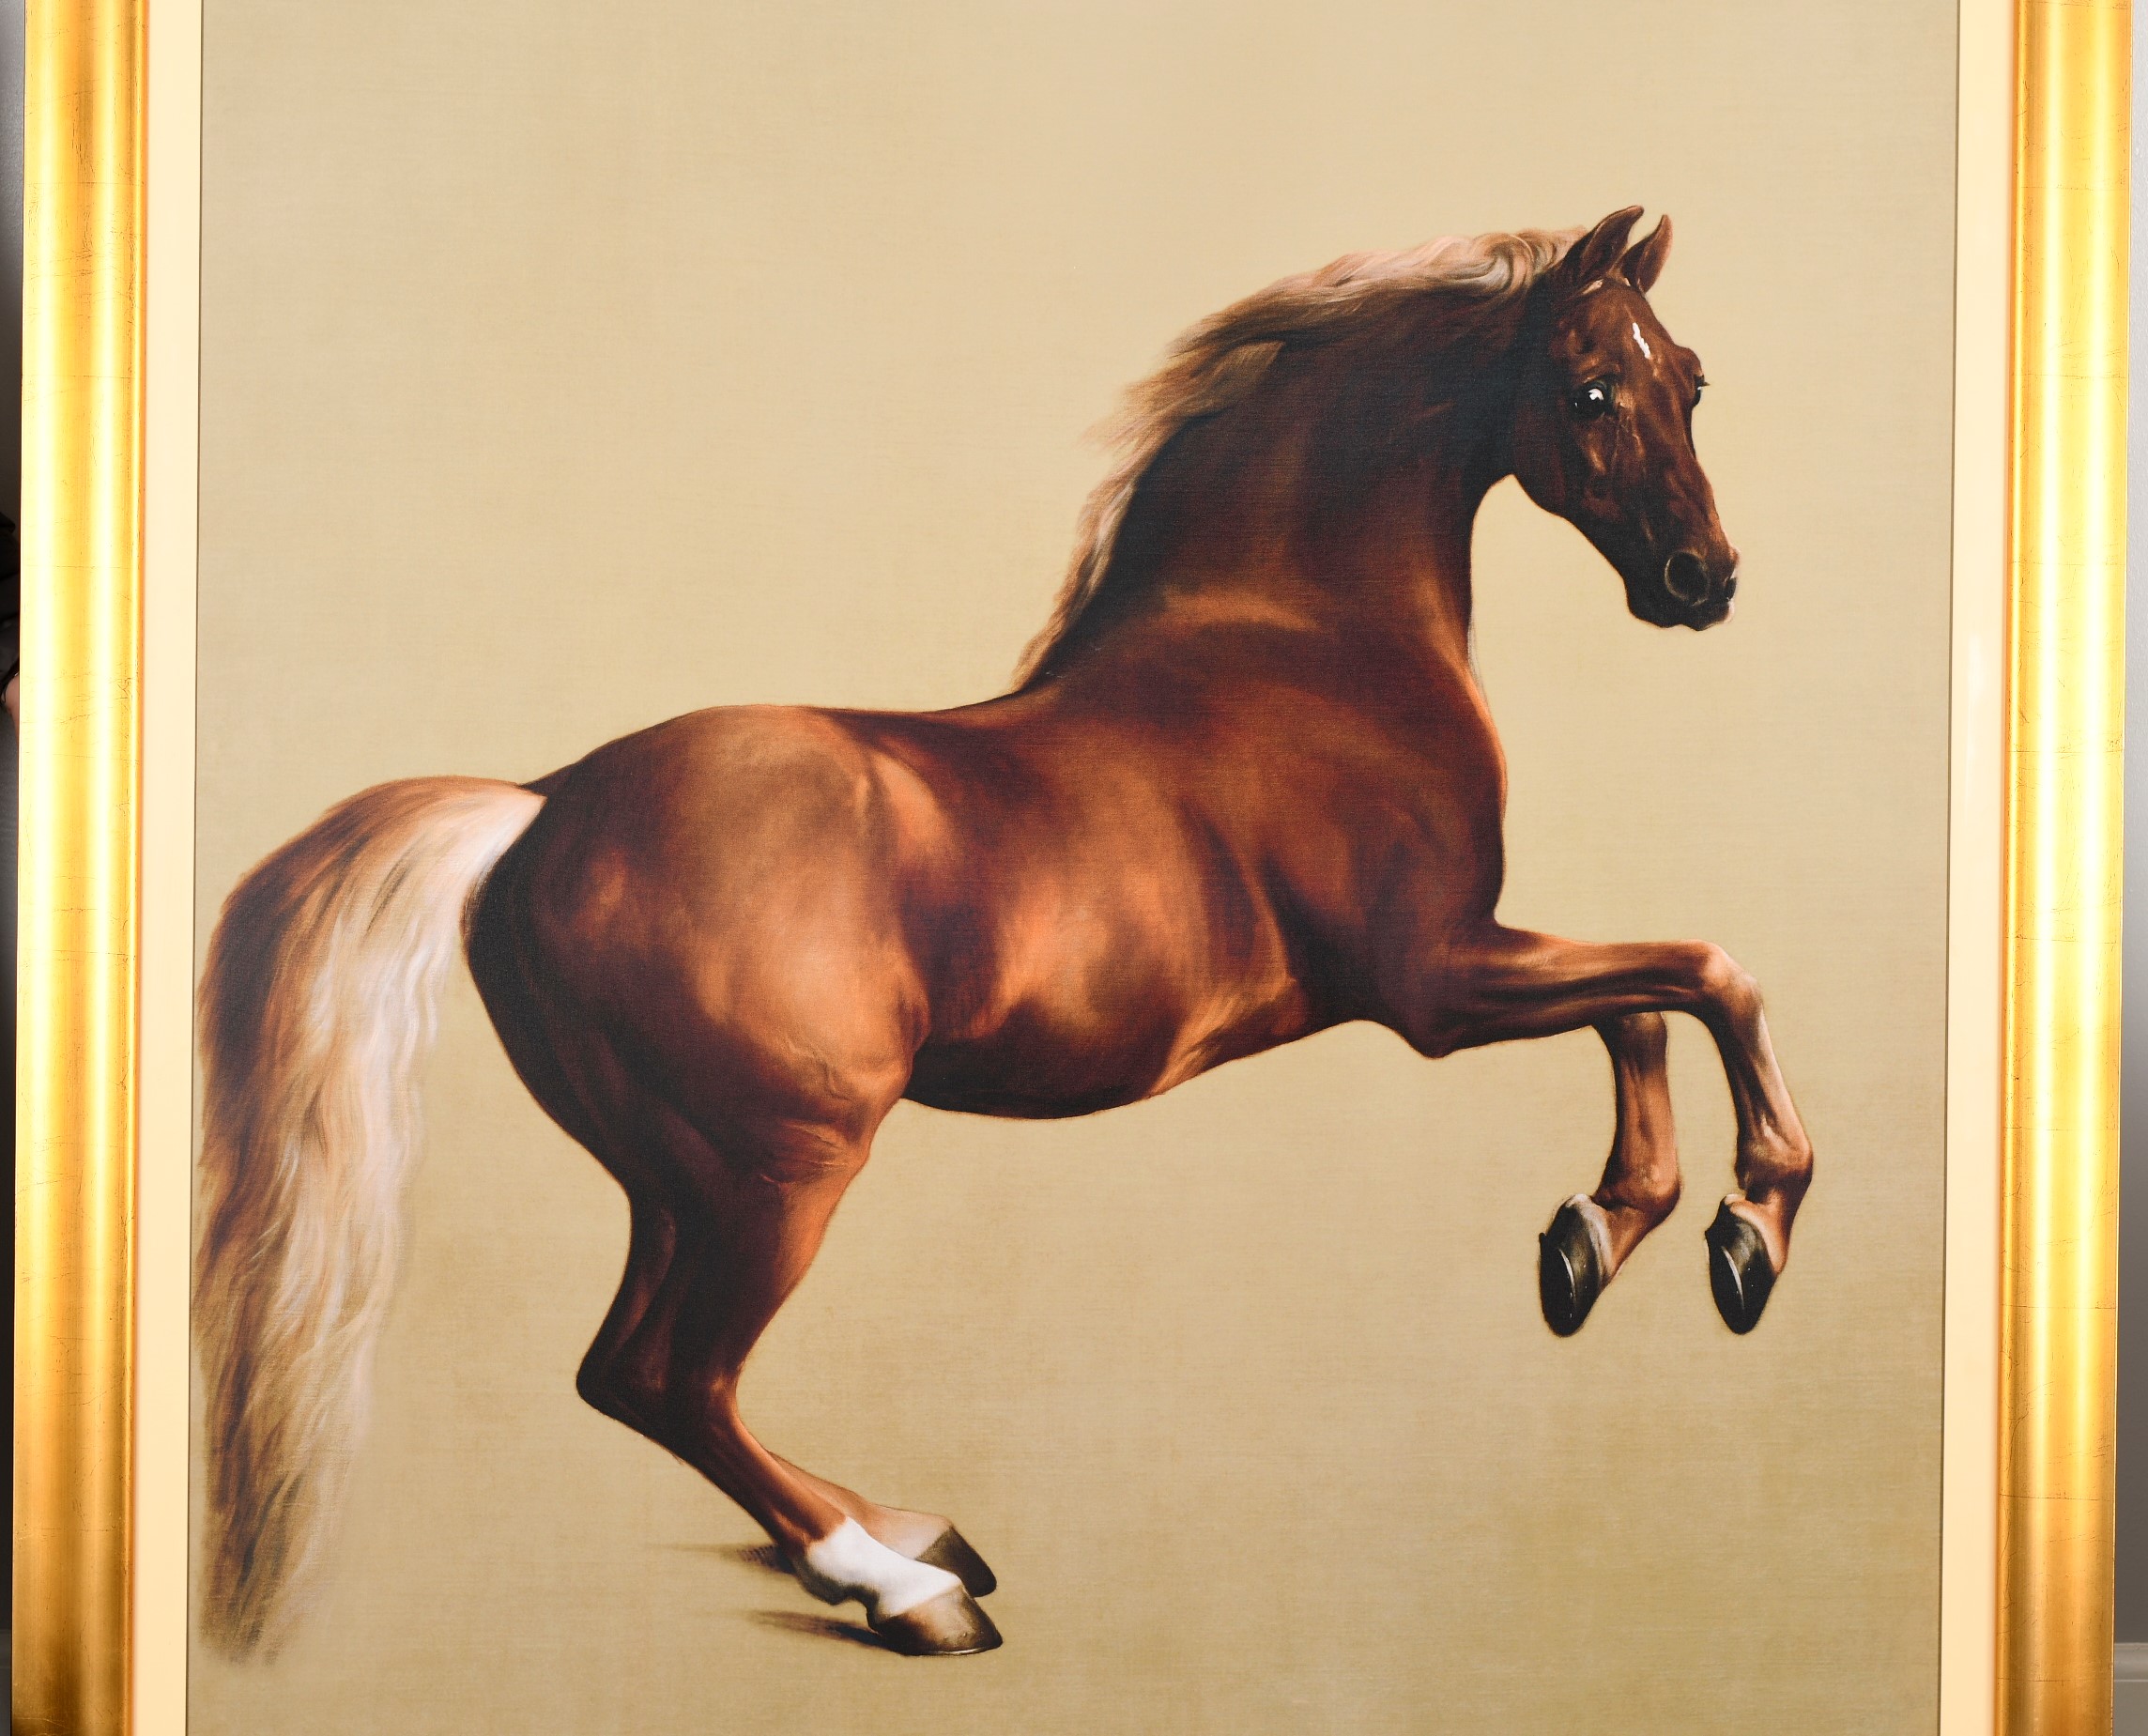 Stunning 6ft x 5ft George Stubbs """"Whistlejacket"""" Limited Edition on Canvas. - Image 8 of 12